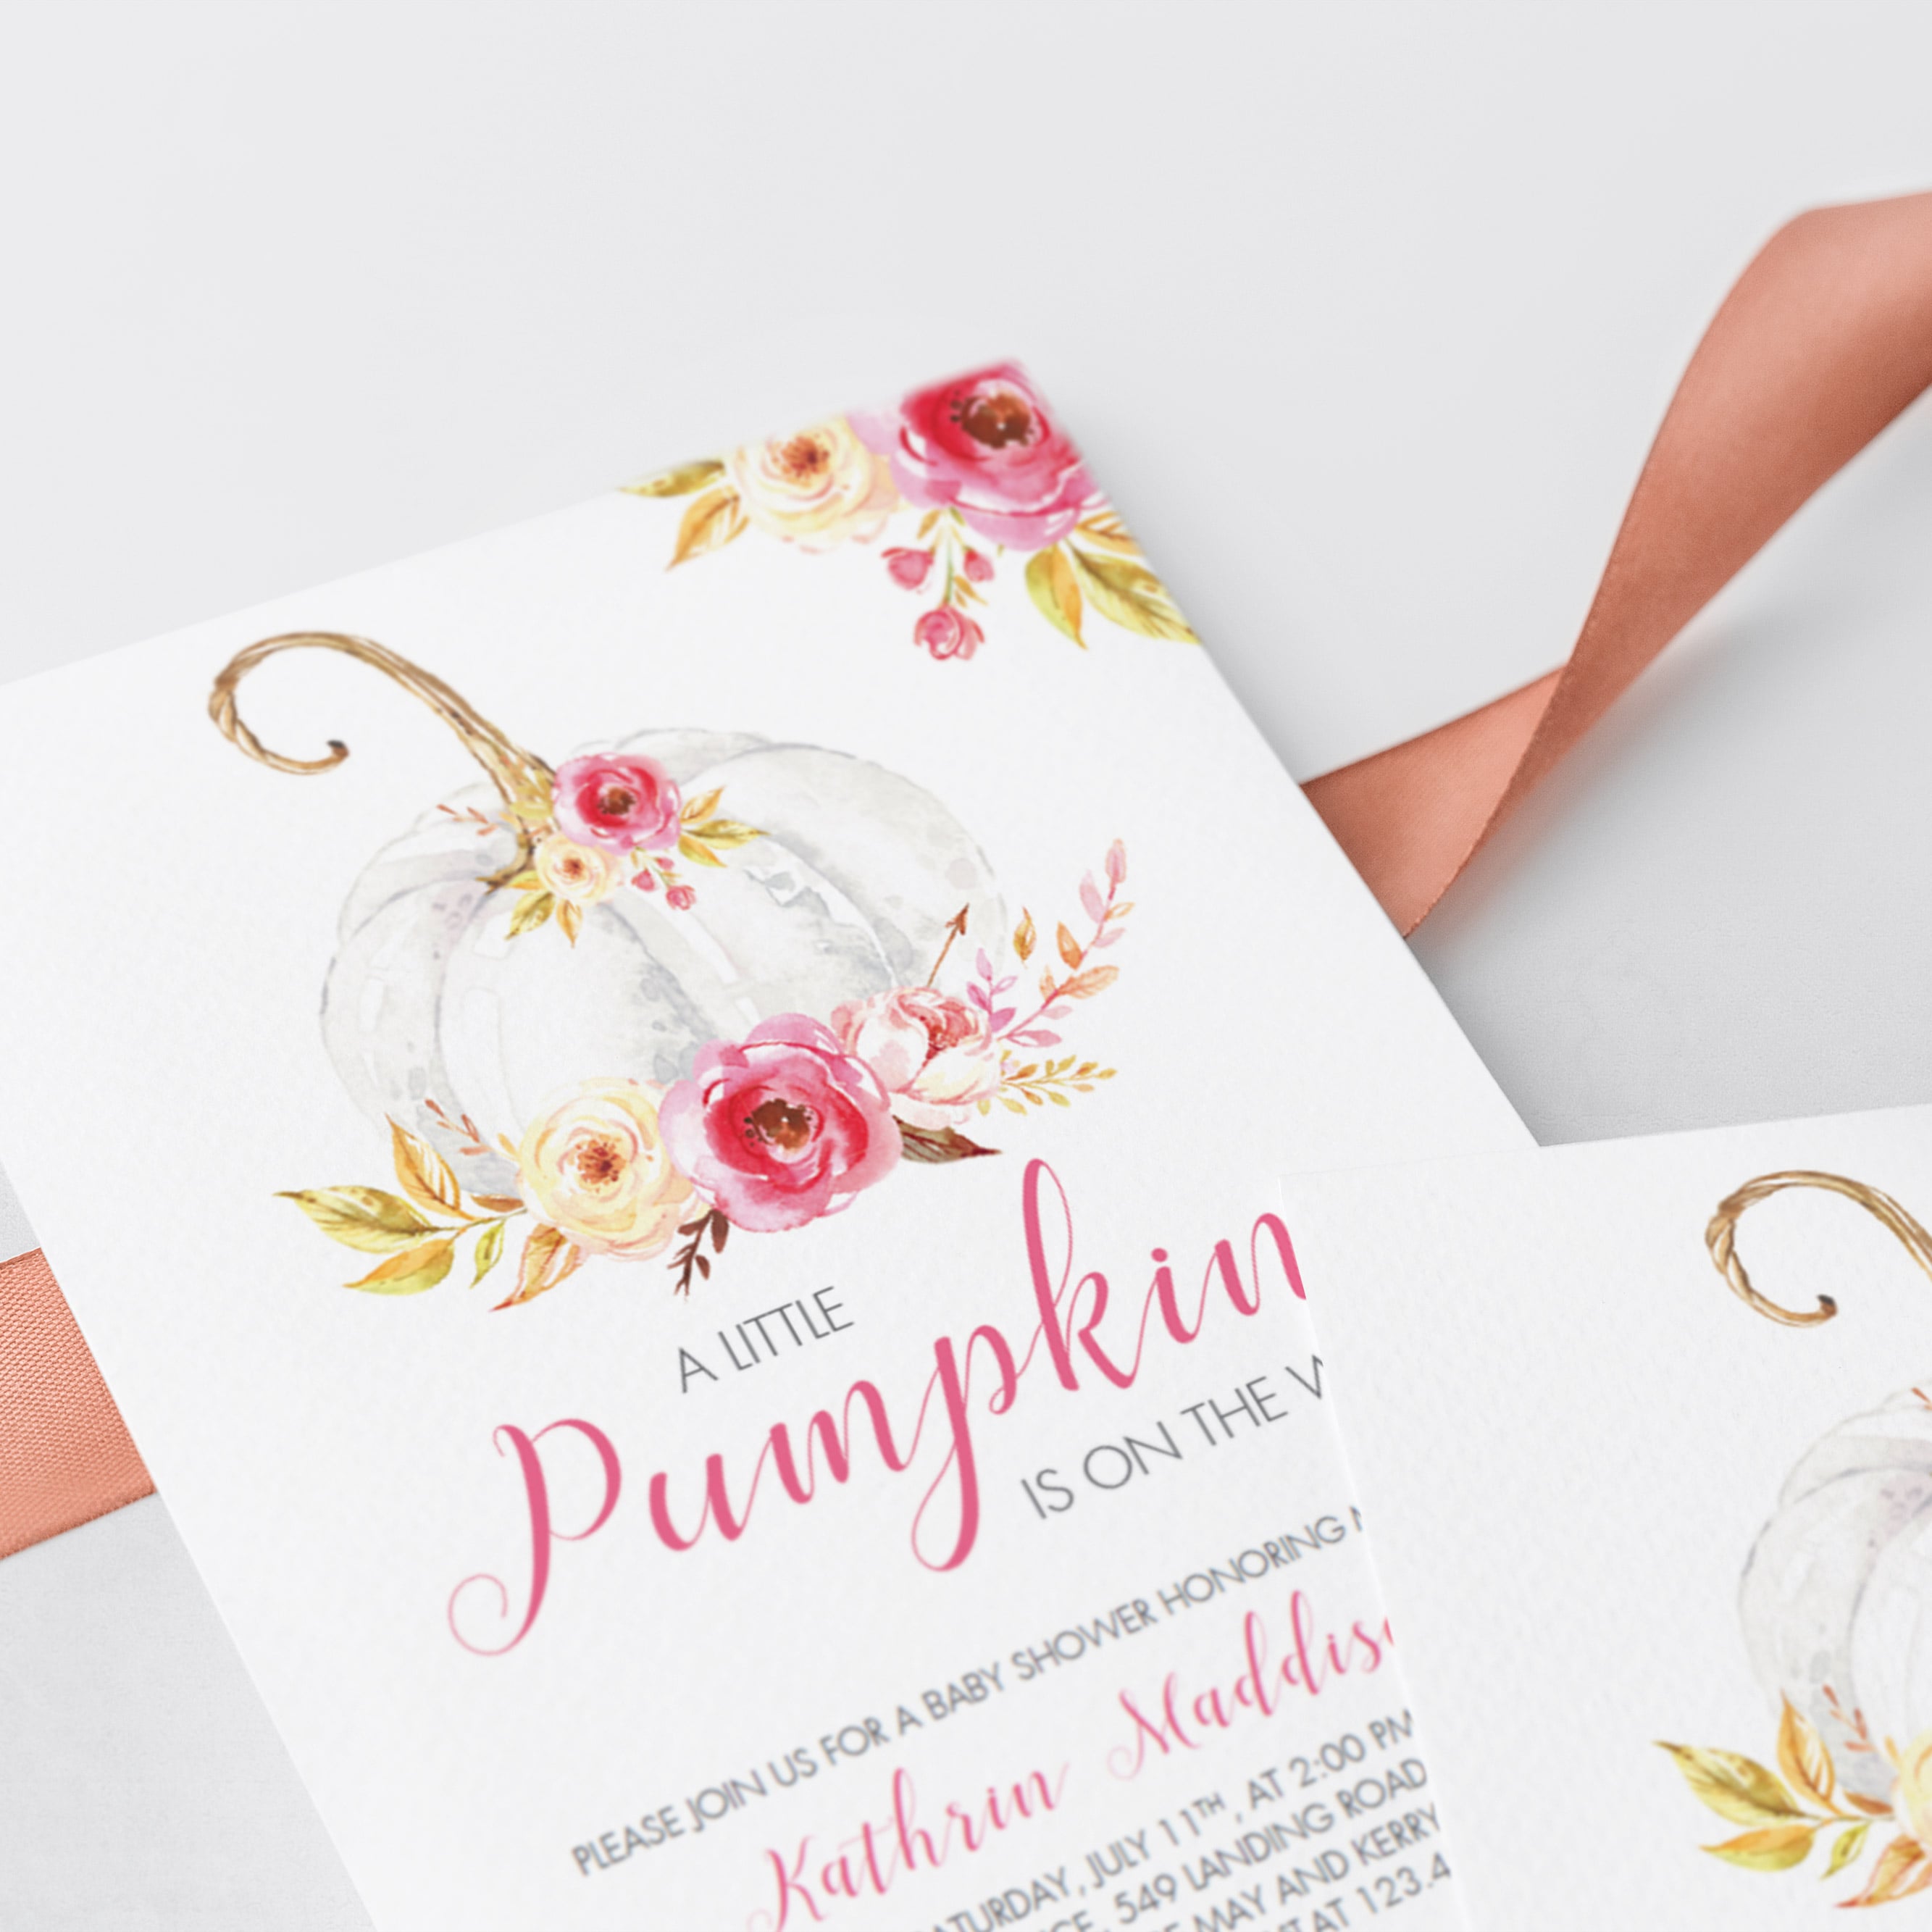 Watercolor pumpkin baby shower invitations by LittleSizzle